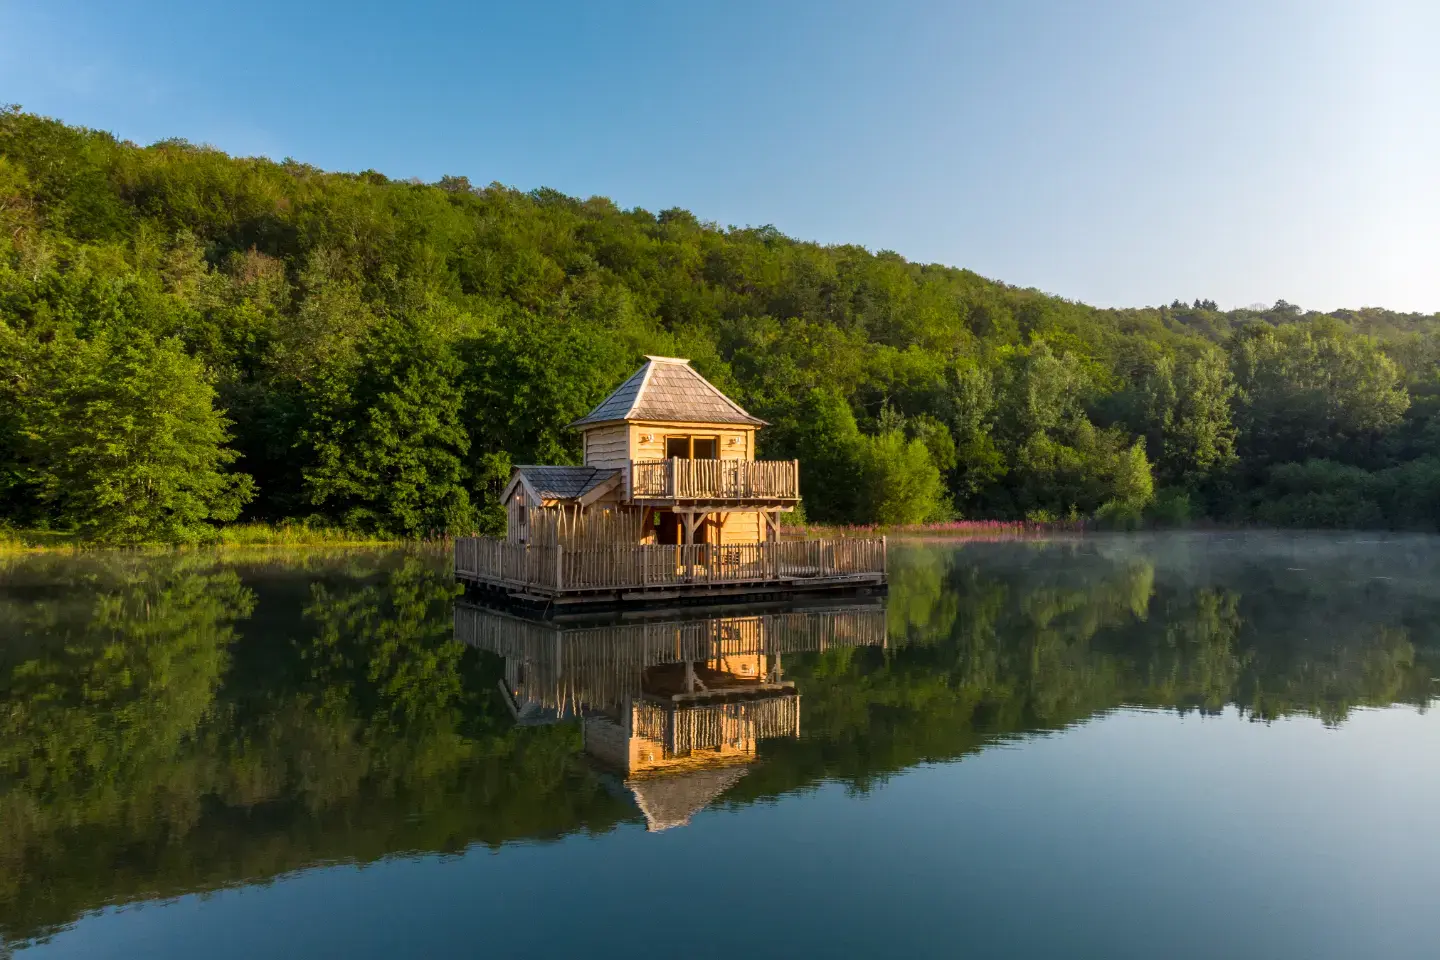 Greengo, booking eco-friendly accommodations, a French alternative to Airbnb